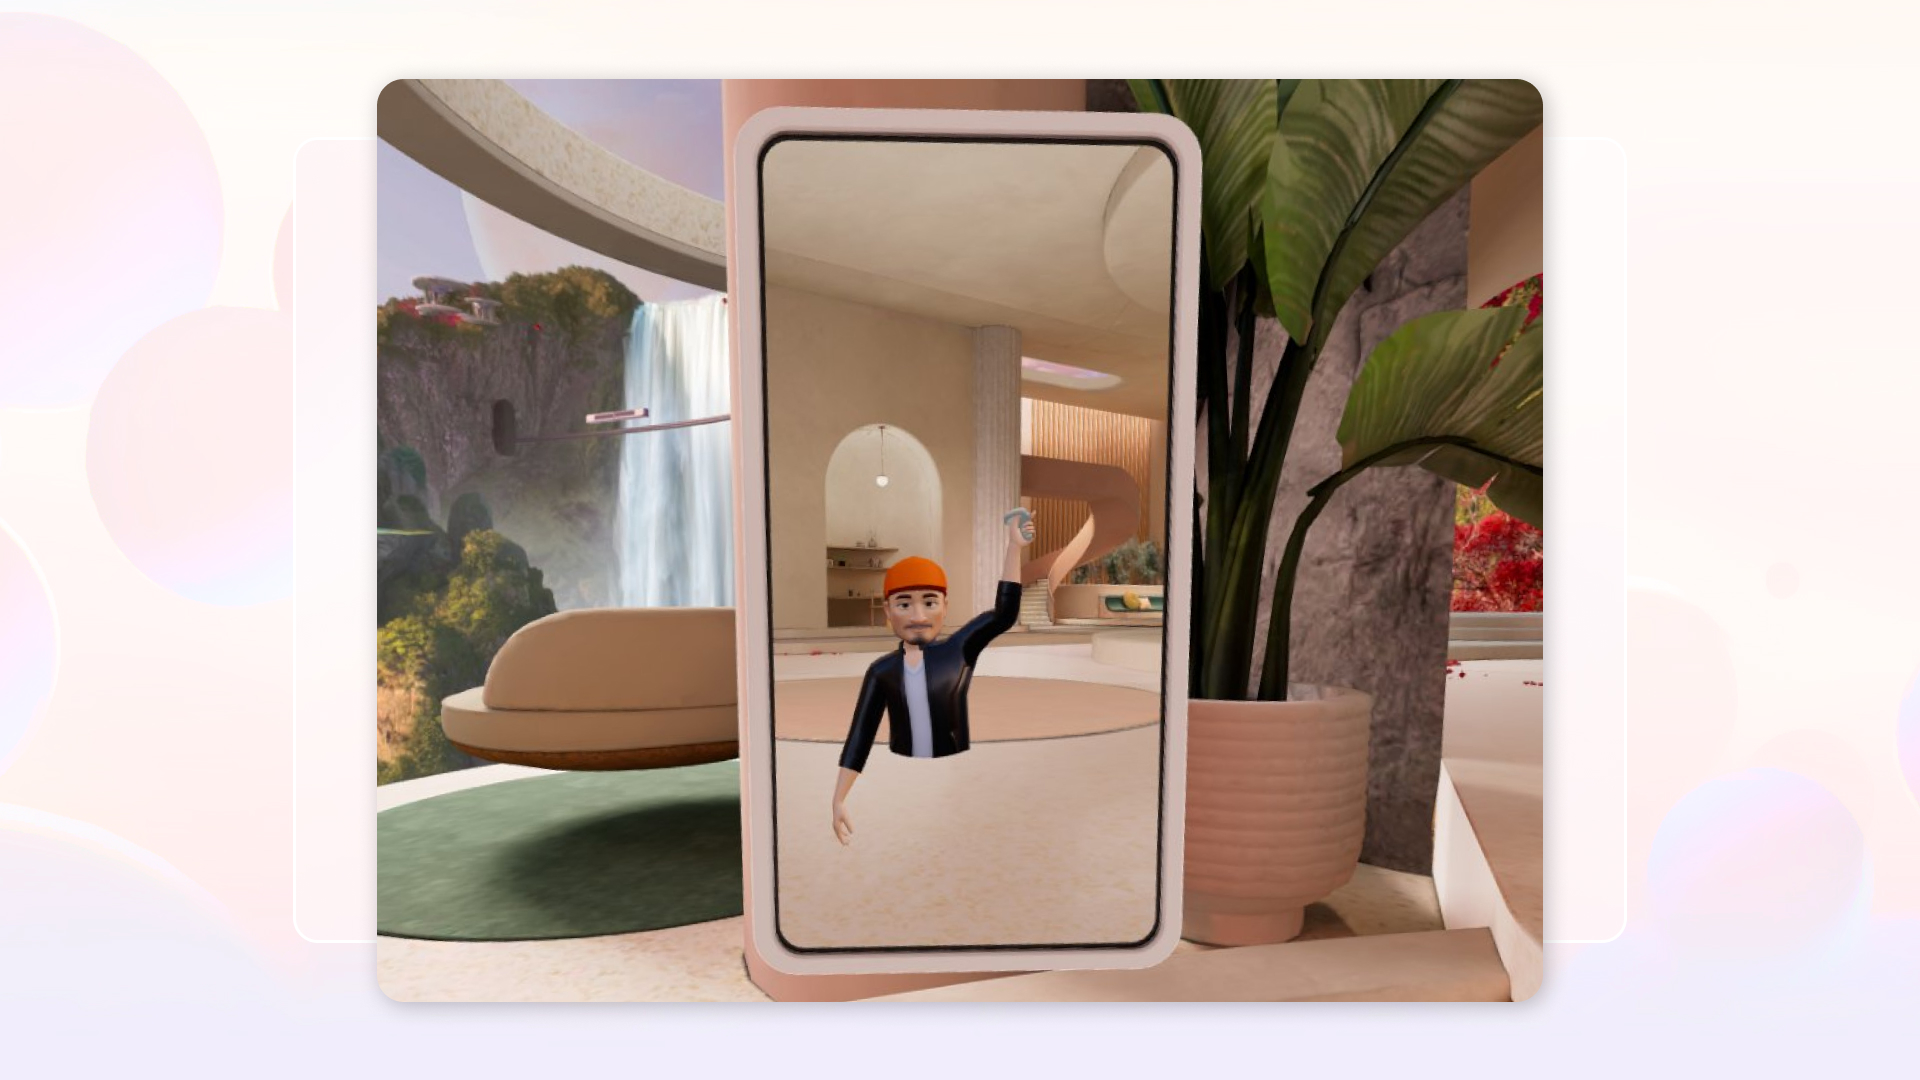 Image of an avatar in front of a mirror in Meta Horizon Home.